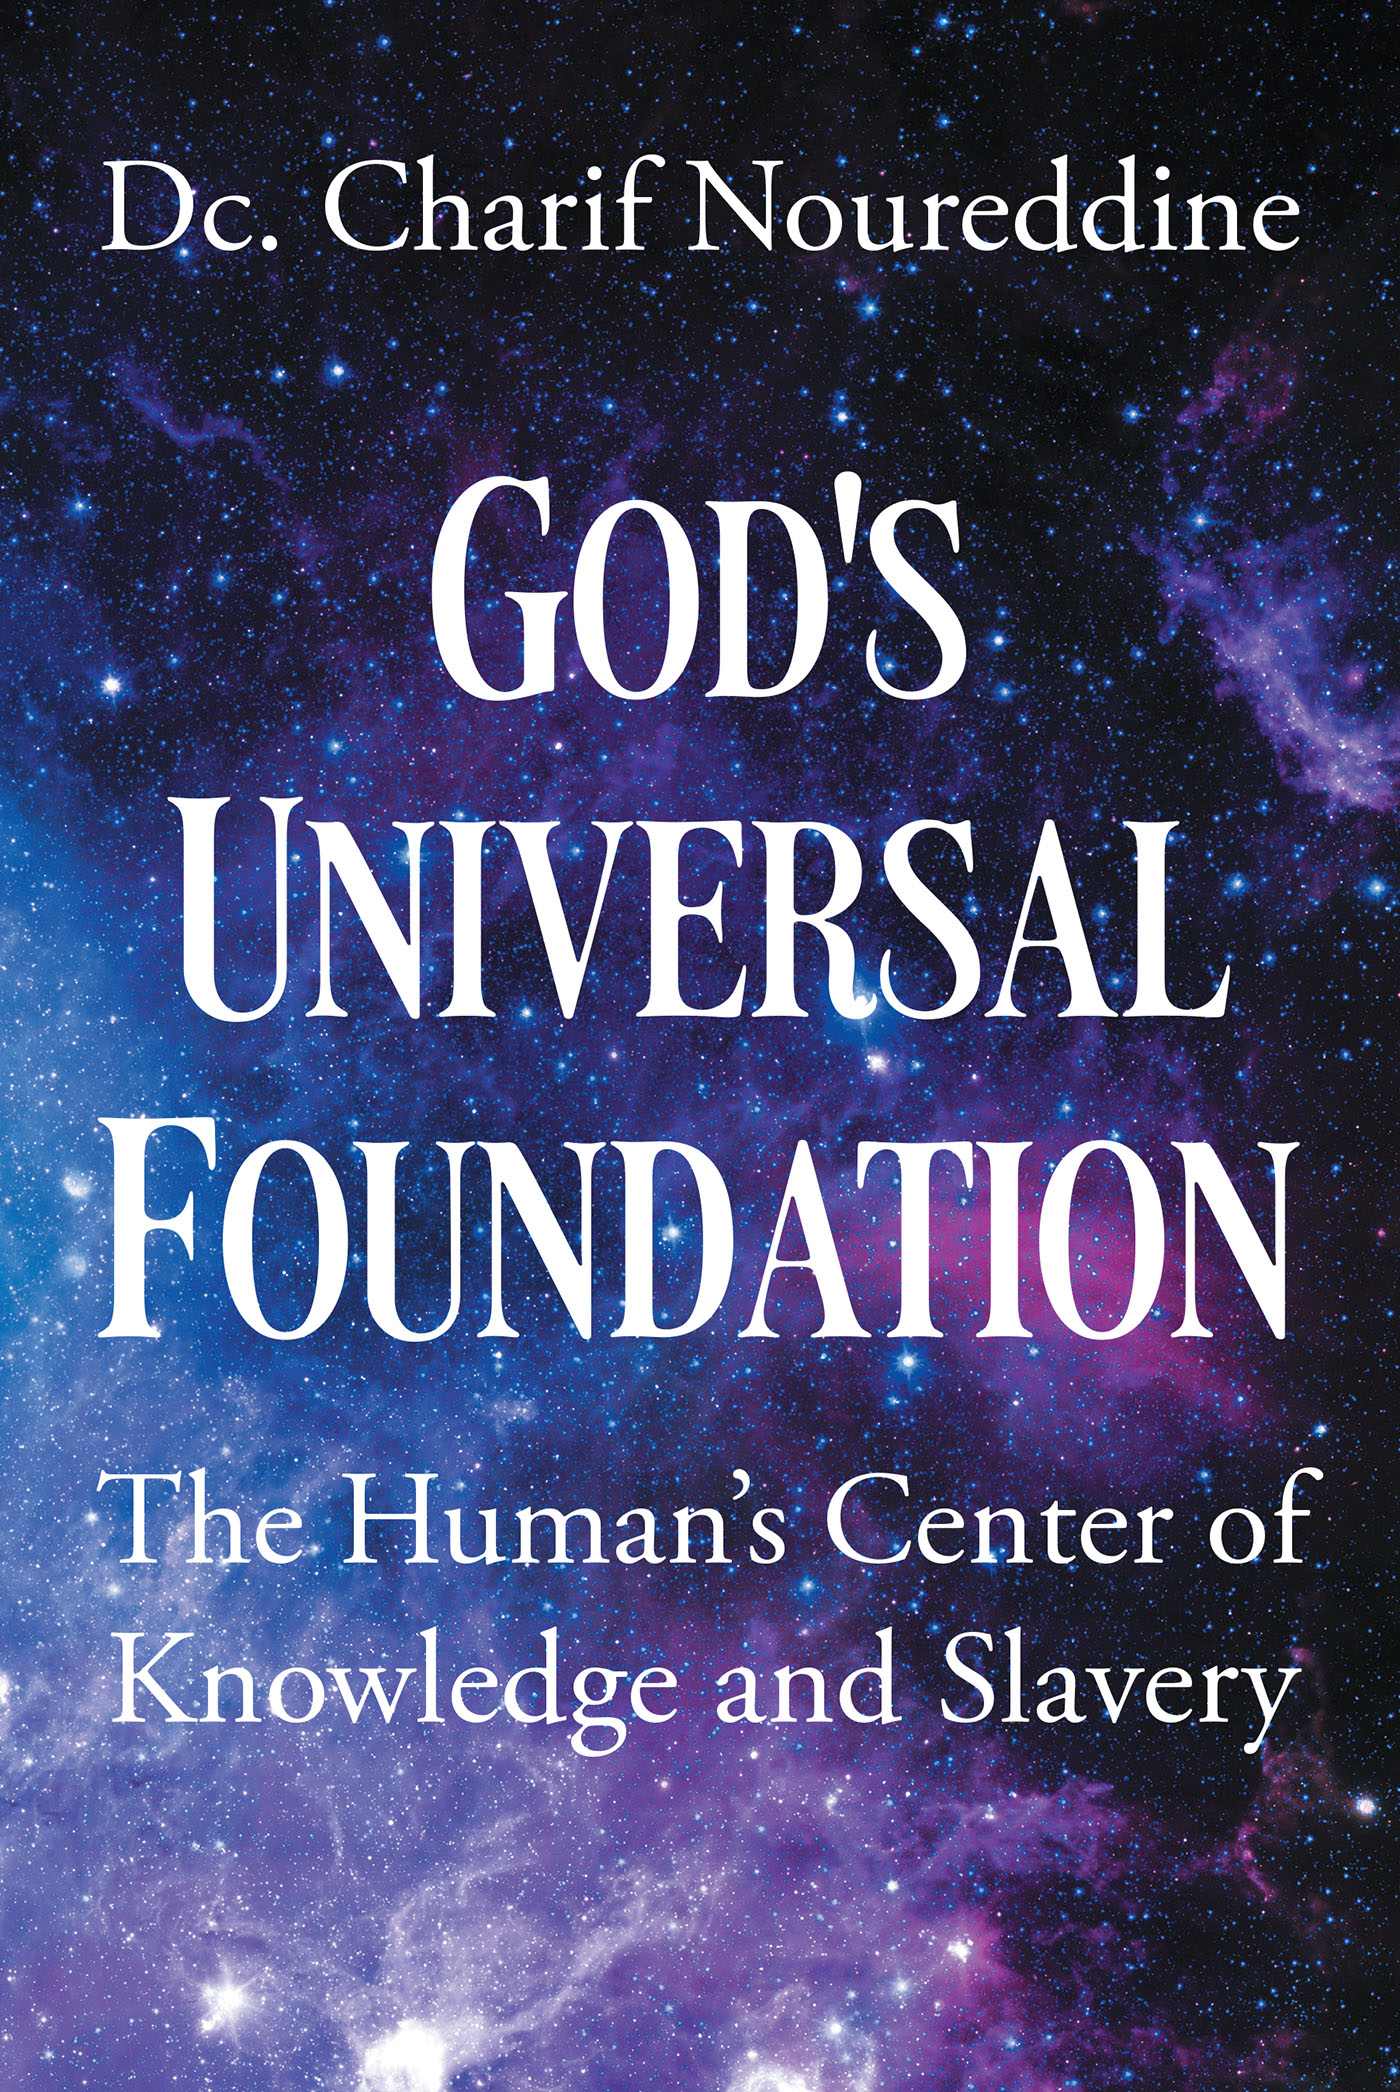 Author Dc. Charif Noureddine’s New Book, “God’s Universal Foundation: The Human’s Center of Knowledge and Slavery,” Views Slavery Through the Lens of Scripture